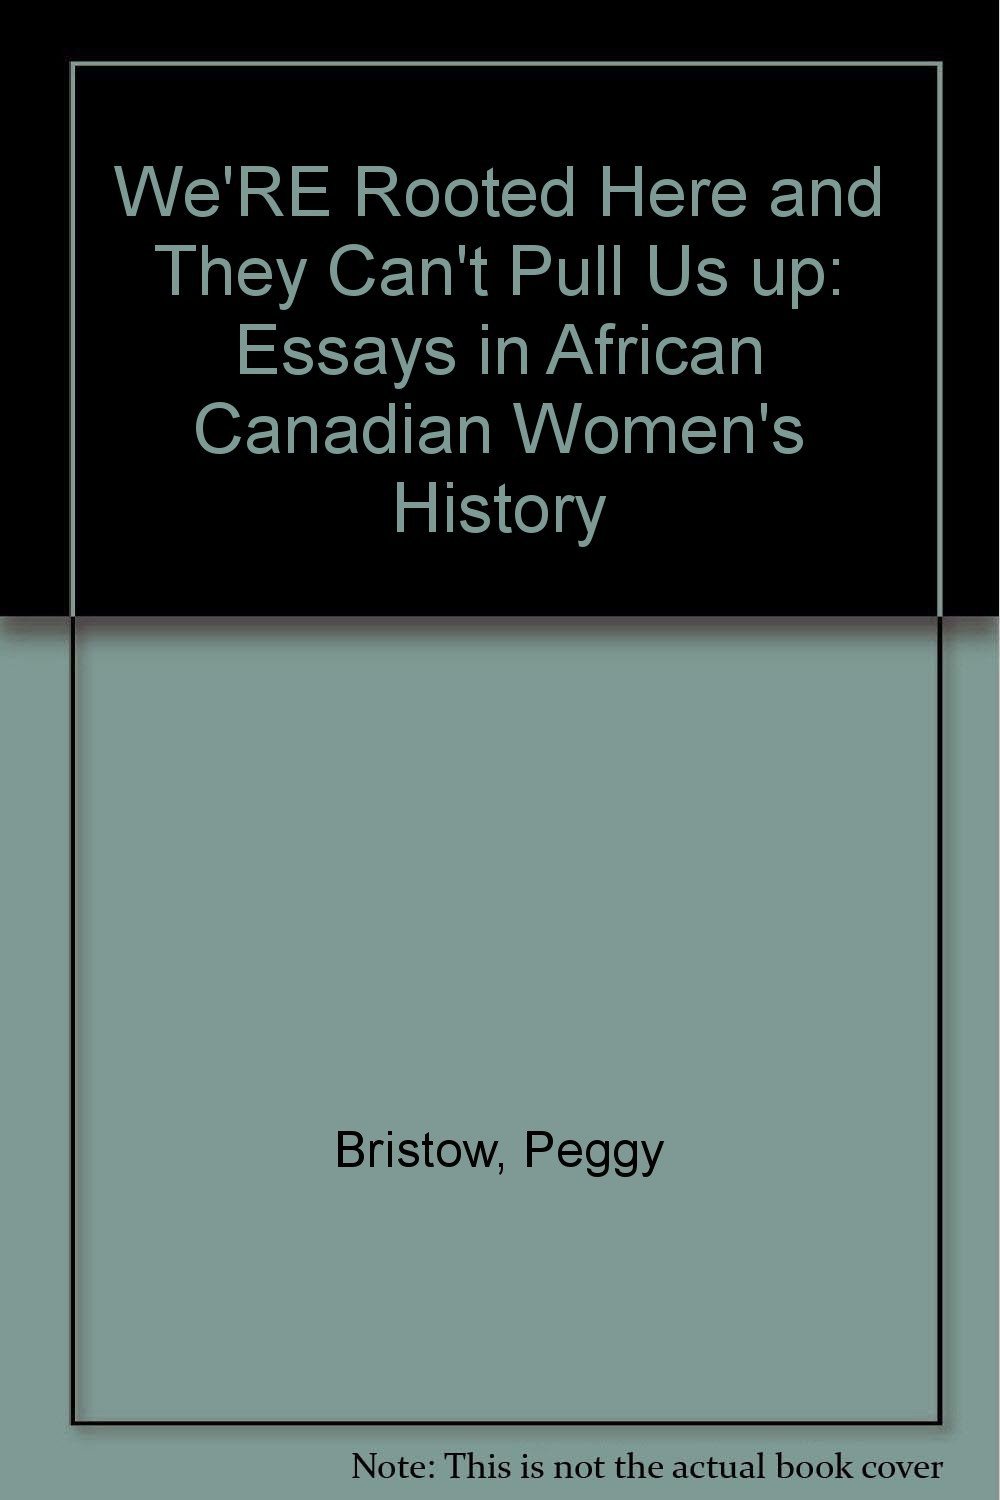 We're Rooted Here and They Can't Pull Us Up': Essays in African Canadian Women's History